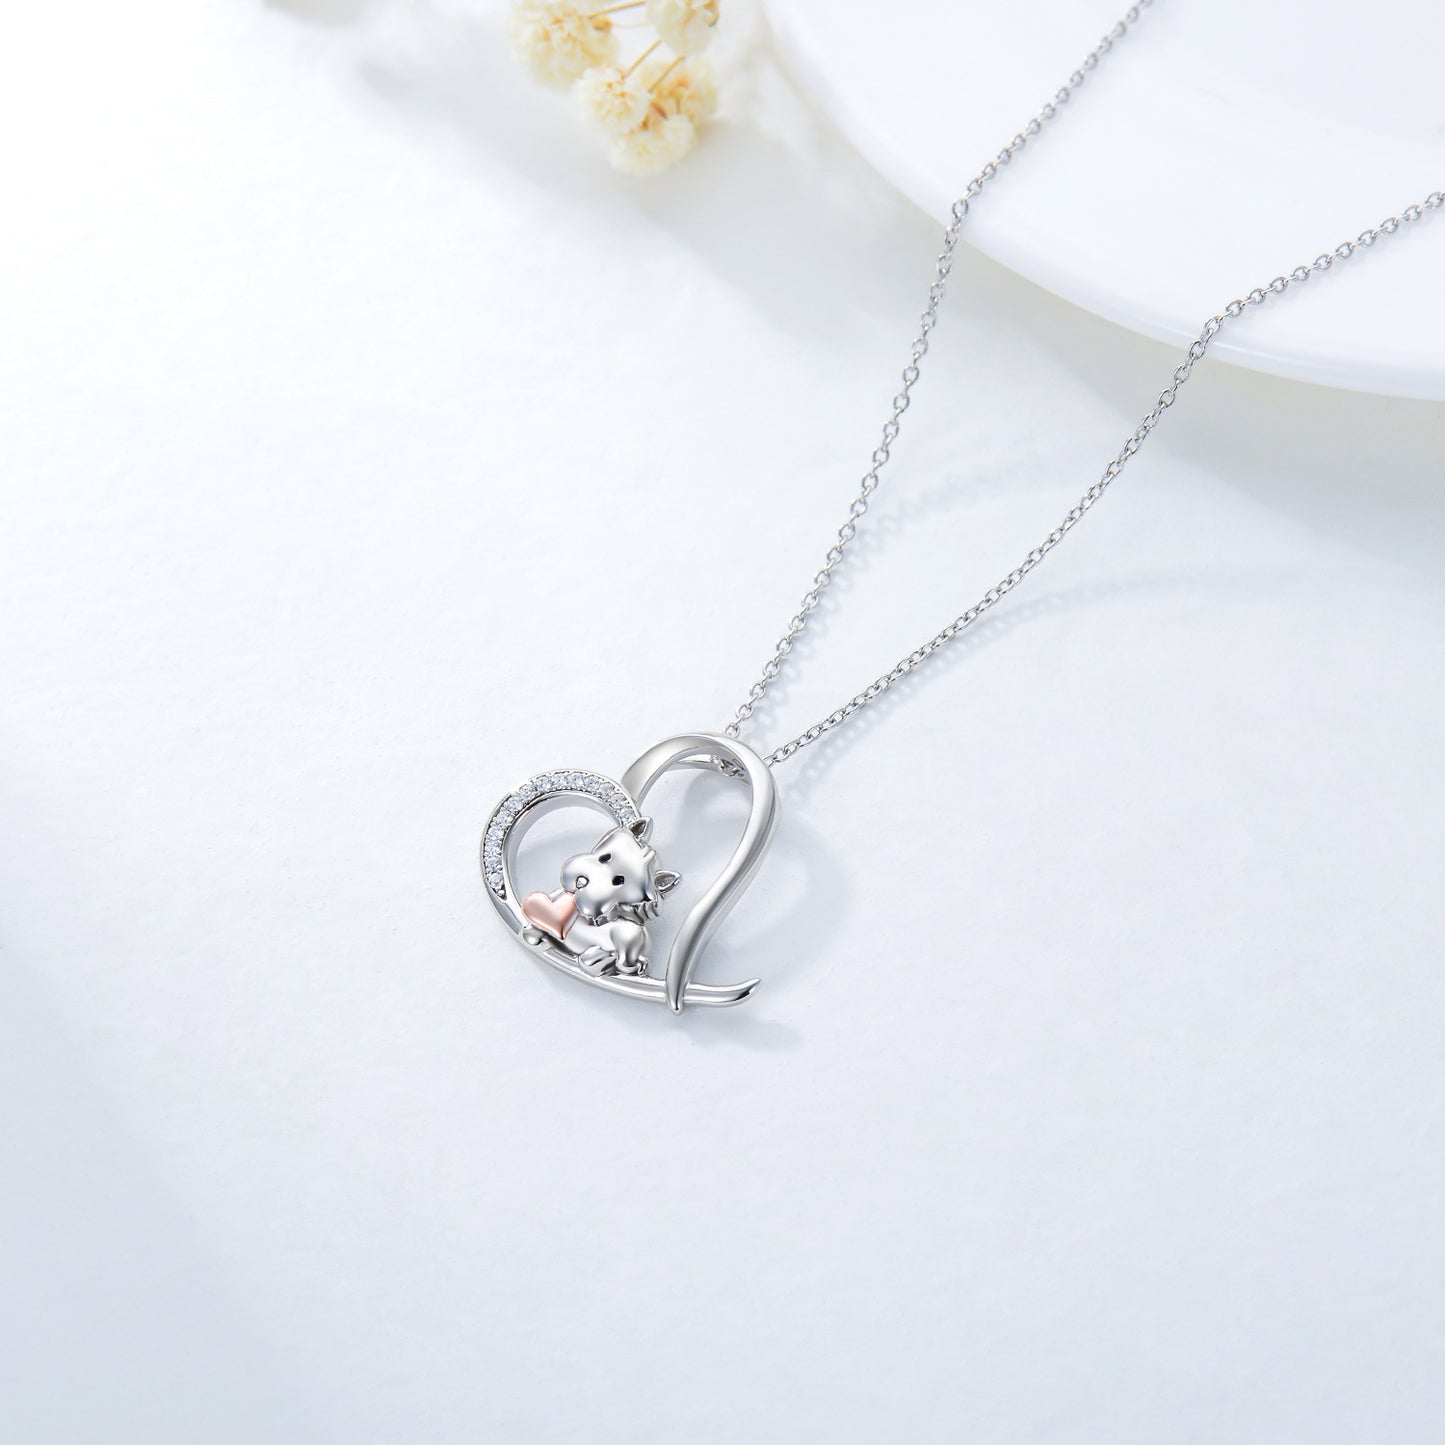 Necklace Sterling Silver with Love Heart Puppy Dog Pendant Necklace -Perfect Gift for Women